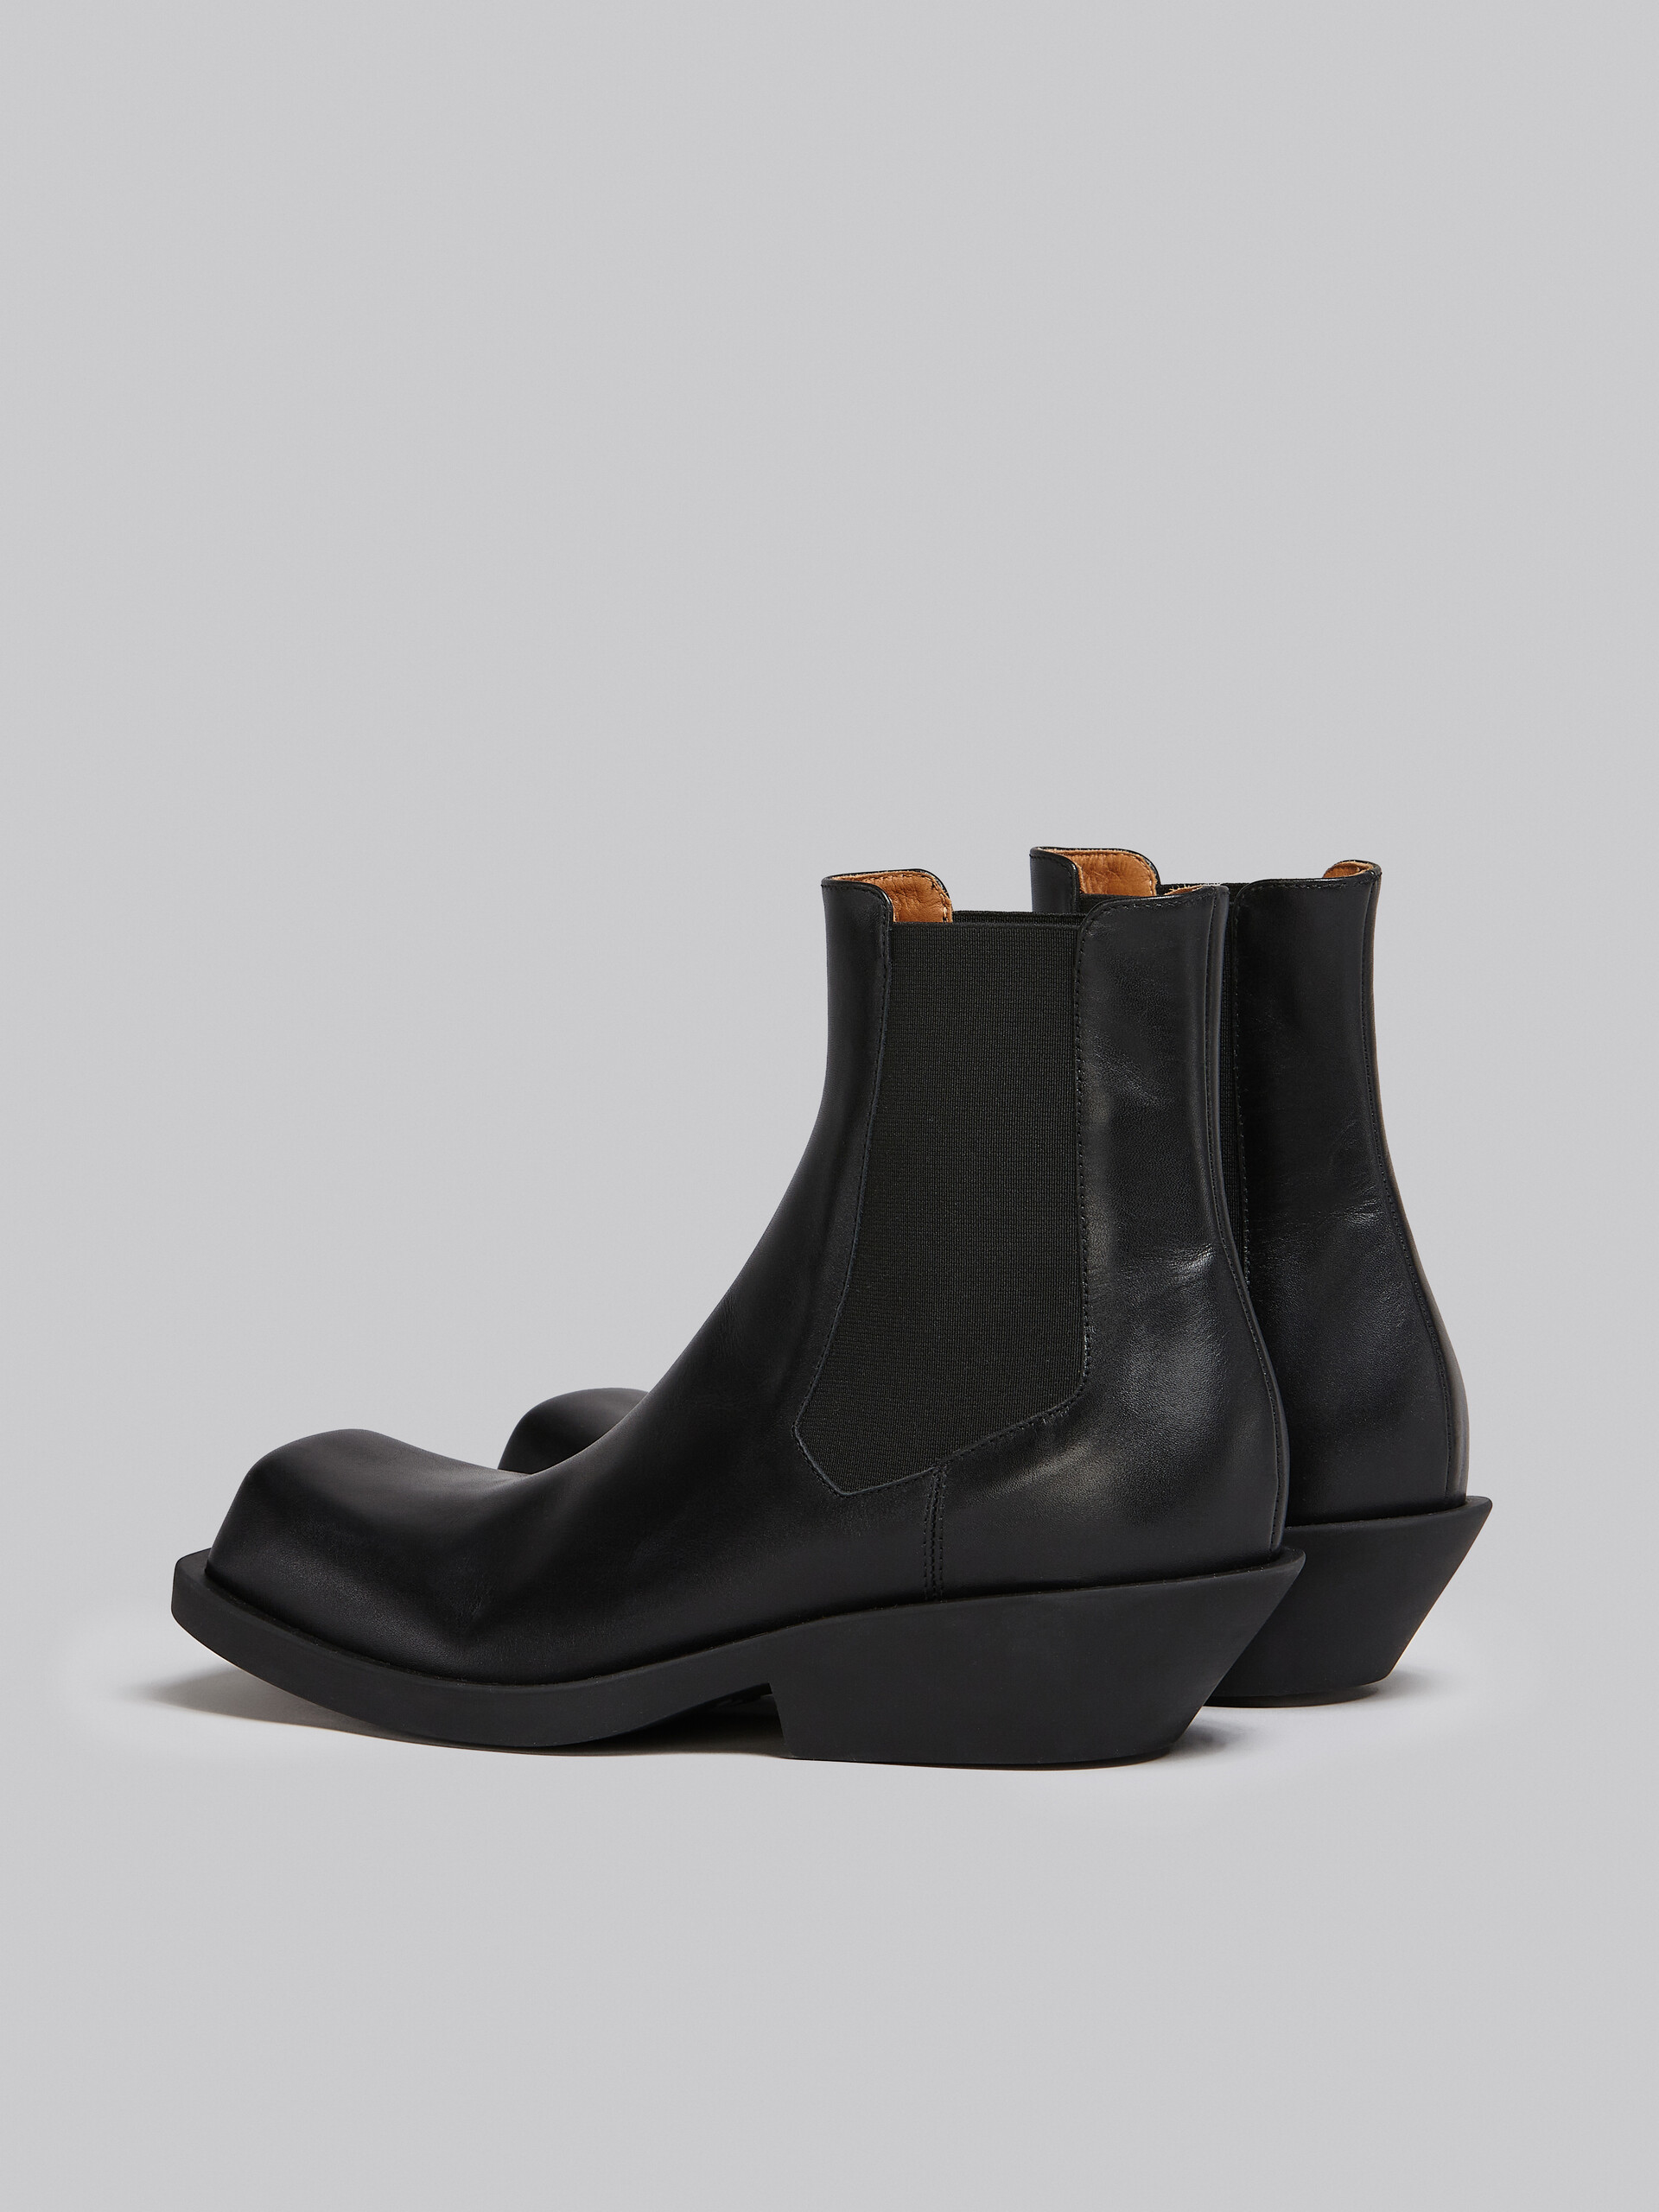 Black leather Chelsea boot - Boots - Image 3